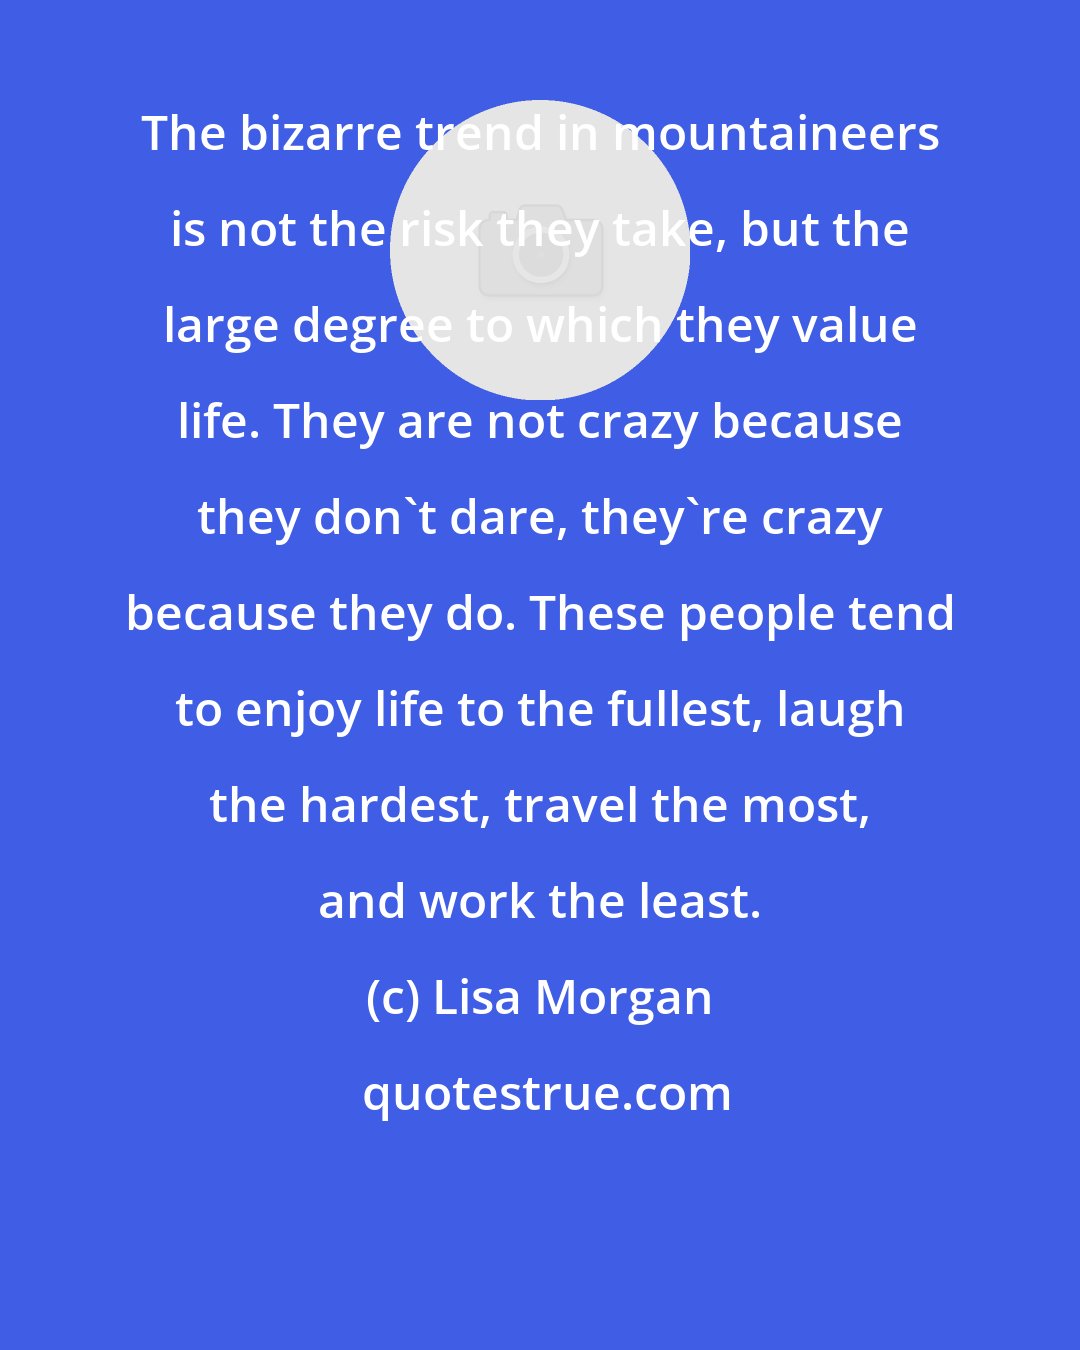 Lisa Morgan: The bizarre trend in mountaineers is not the risk they take, but the large degree to which they value life. They are not crazy because they don't dare, they're crazy because they do. These people tend to enjoy life to the fullest, laugh the hardest, travel the most, and work the least.